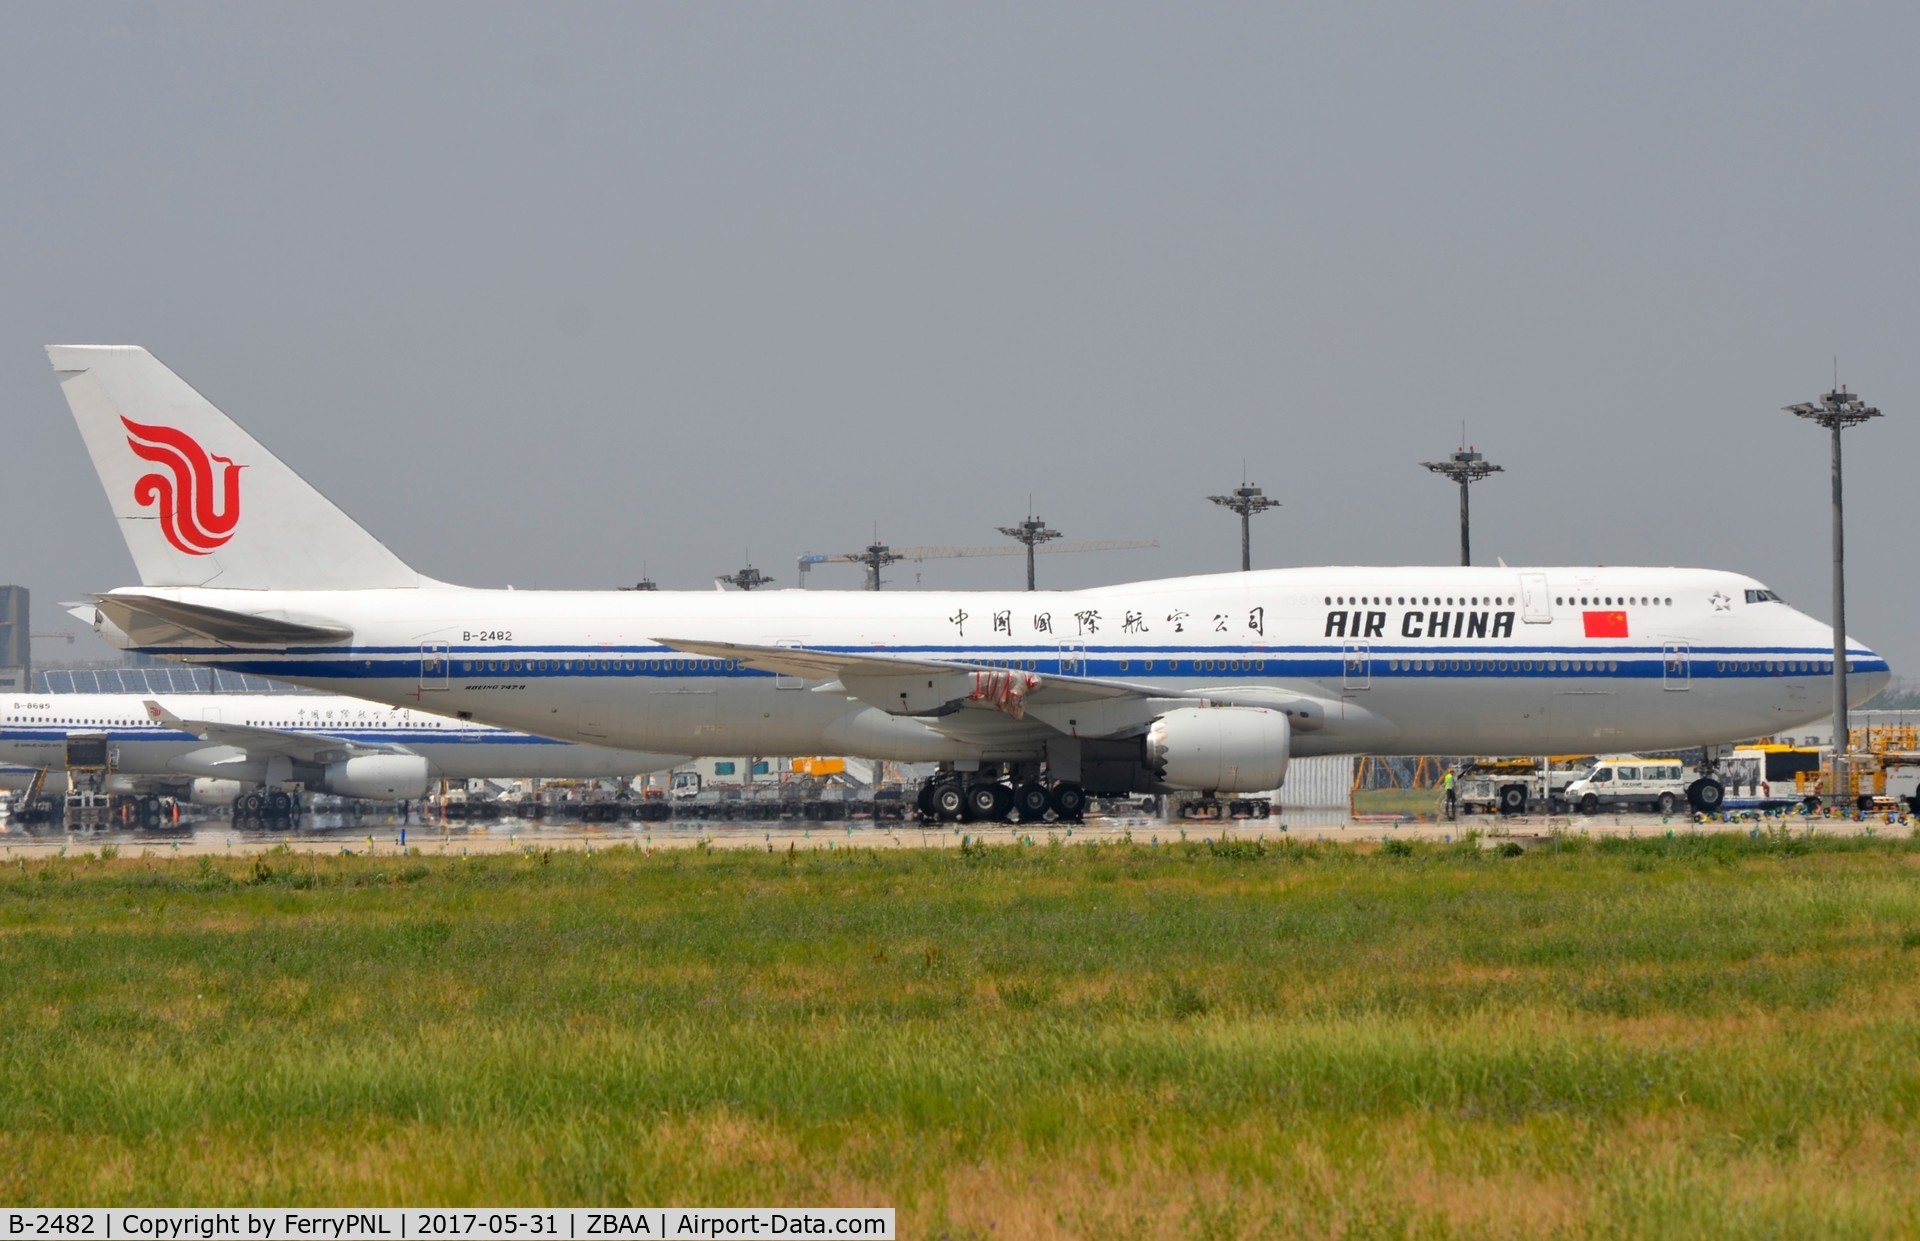 B-2482, Boeing 747-89L C/N 44933, Air China B748 with an engine missing.